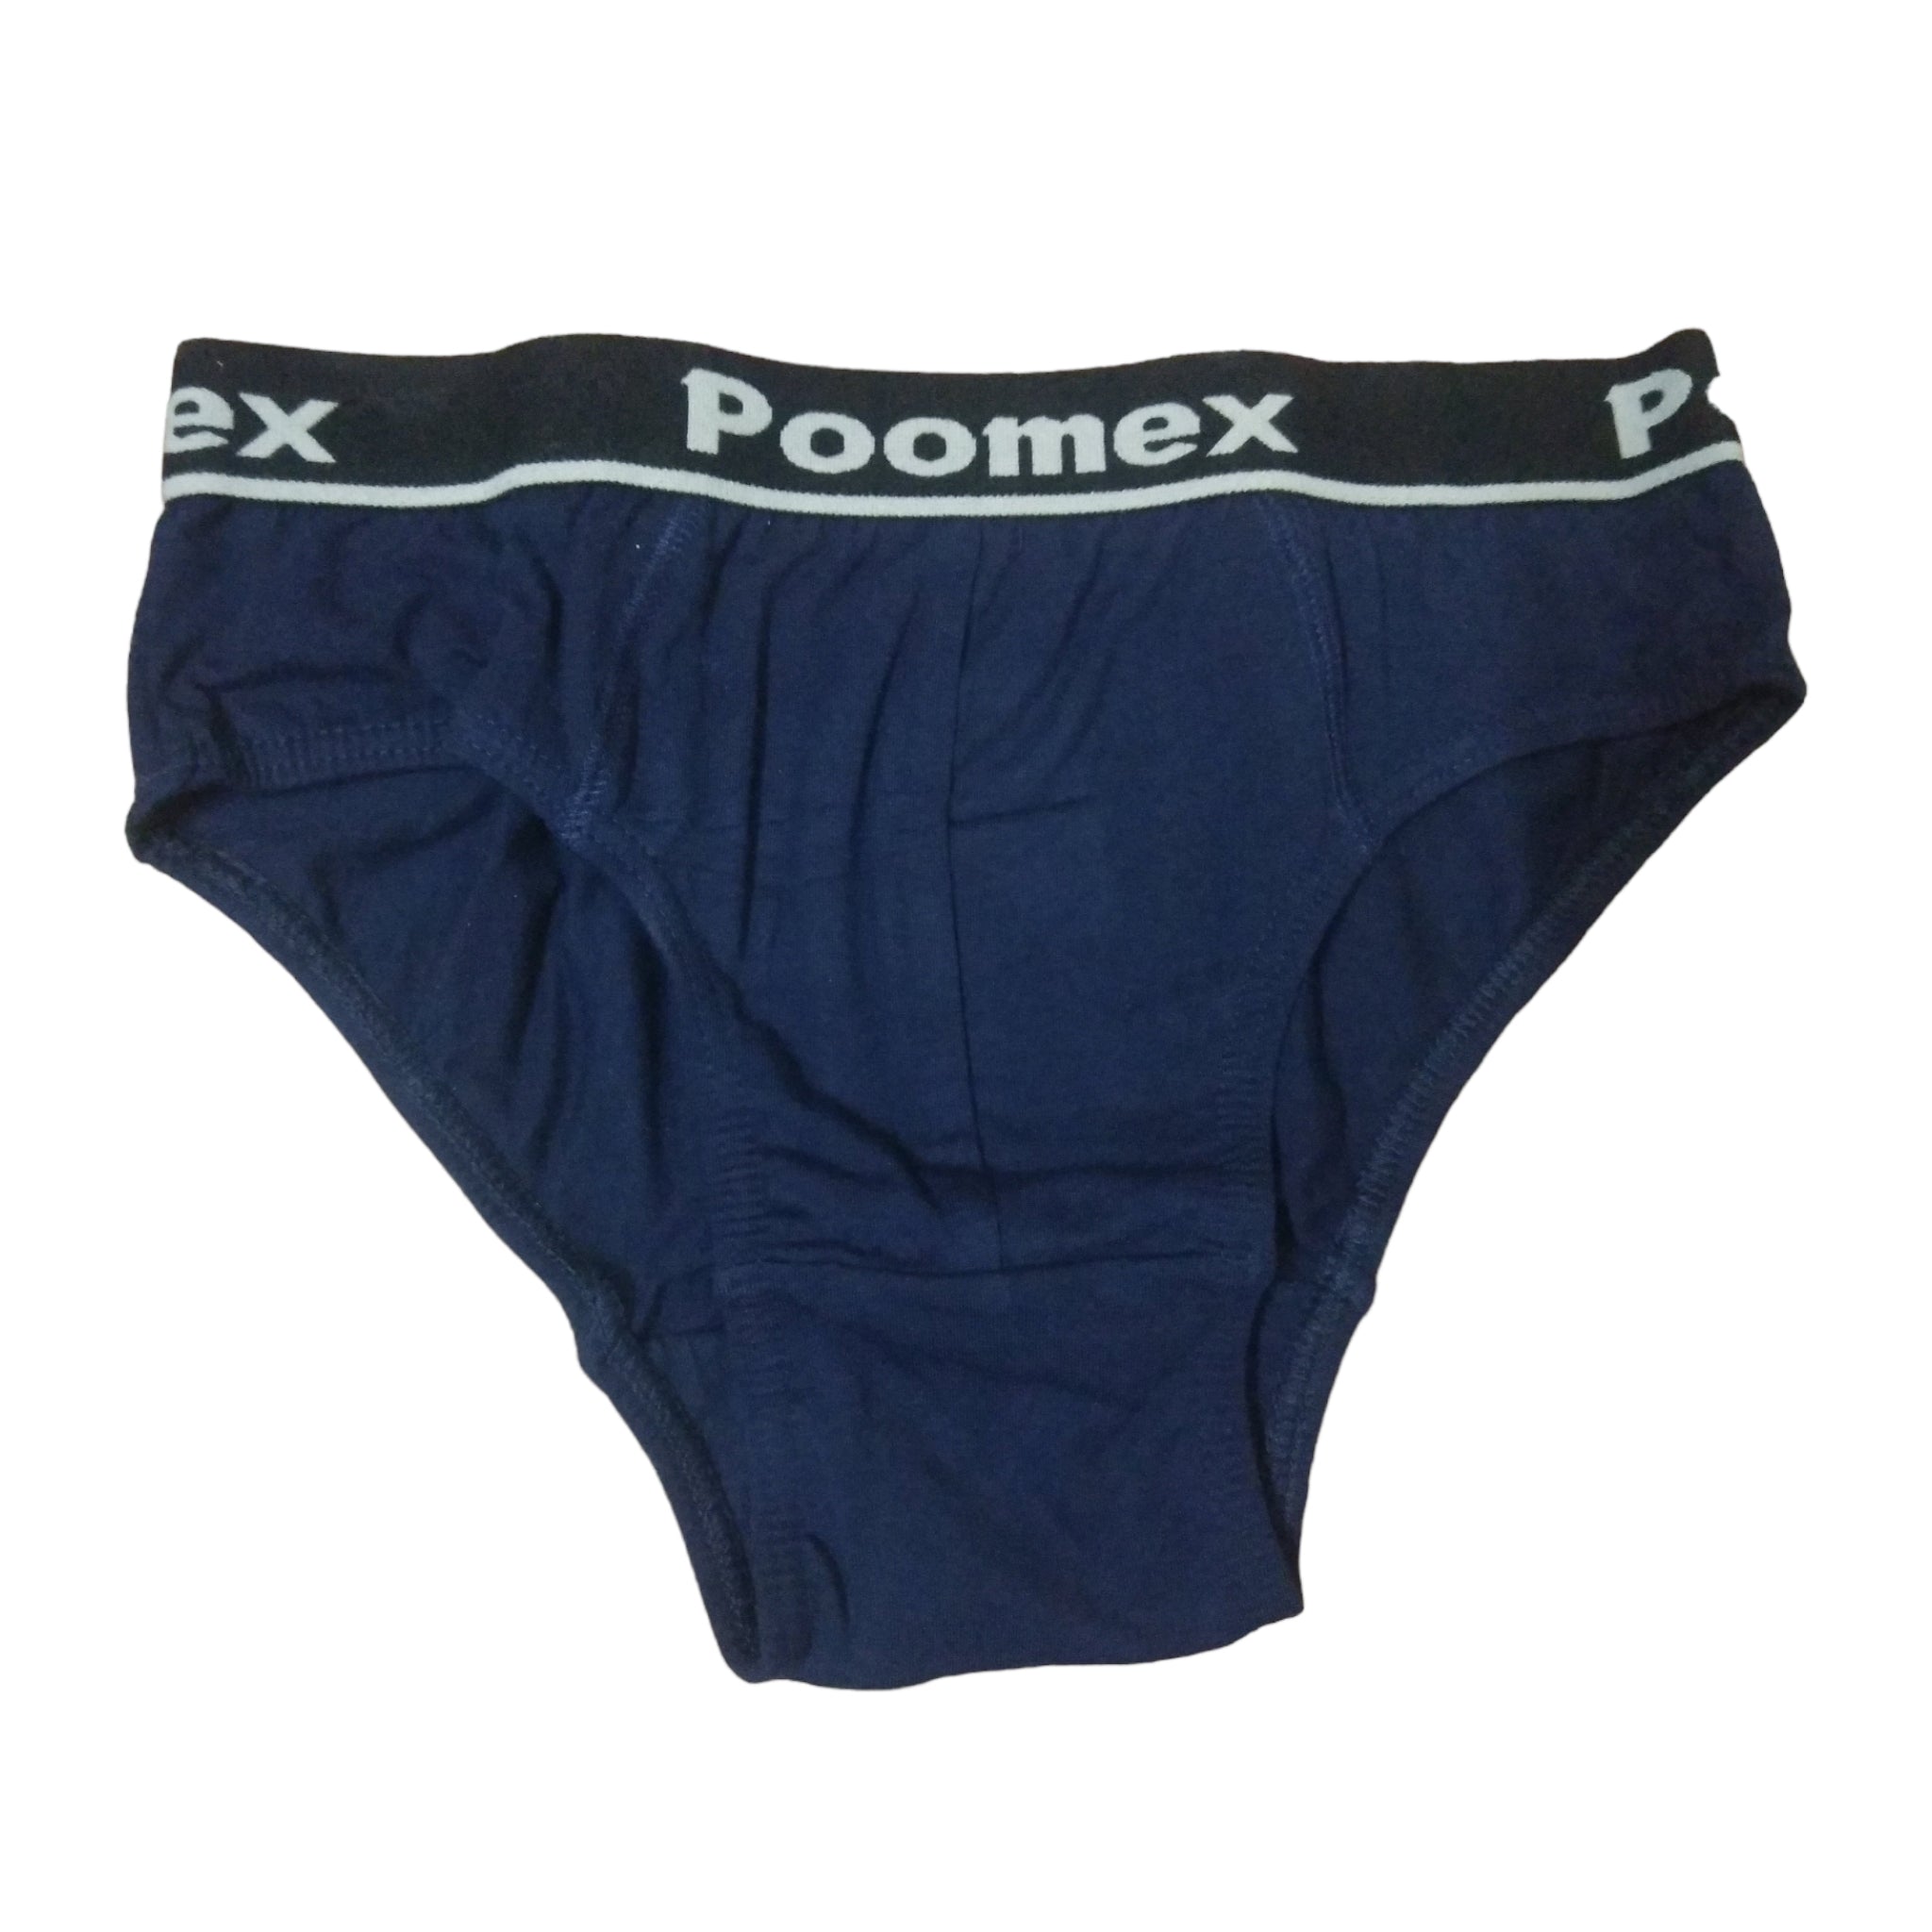 Gents Poomex Elegant Brief - High-Quality 100% Cotton. Invisible Wear. Fast  Shipping. COD & Refund Available.